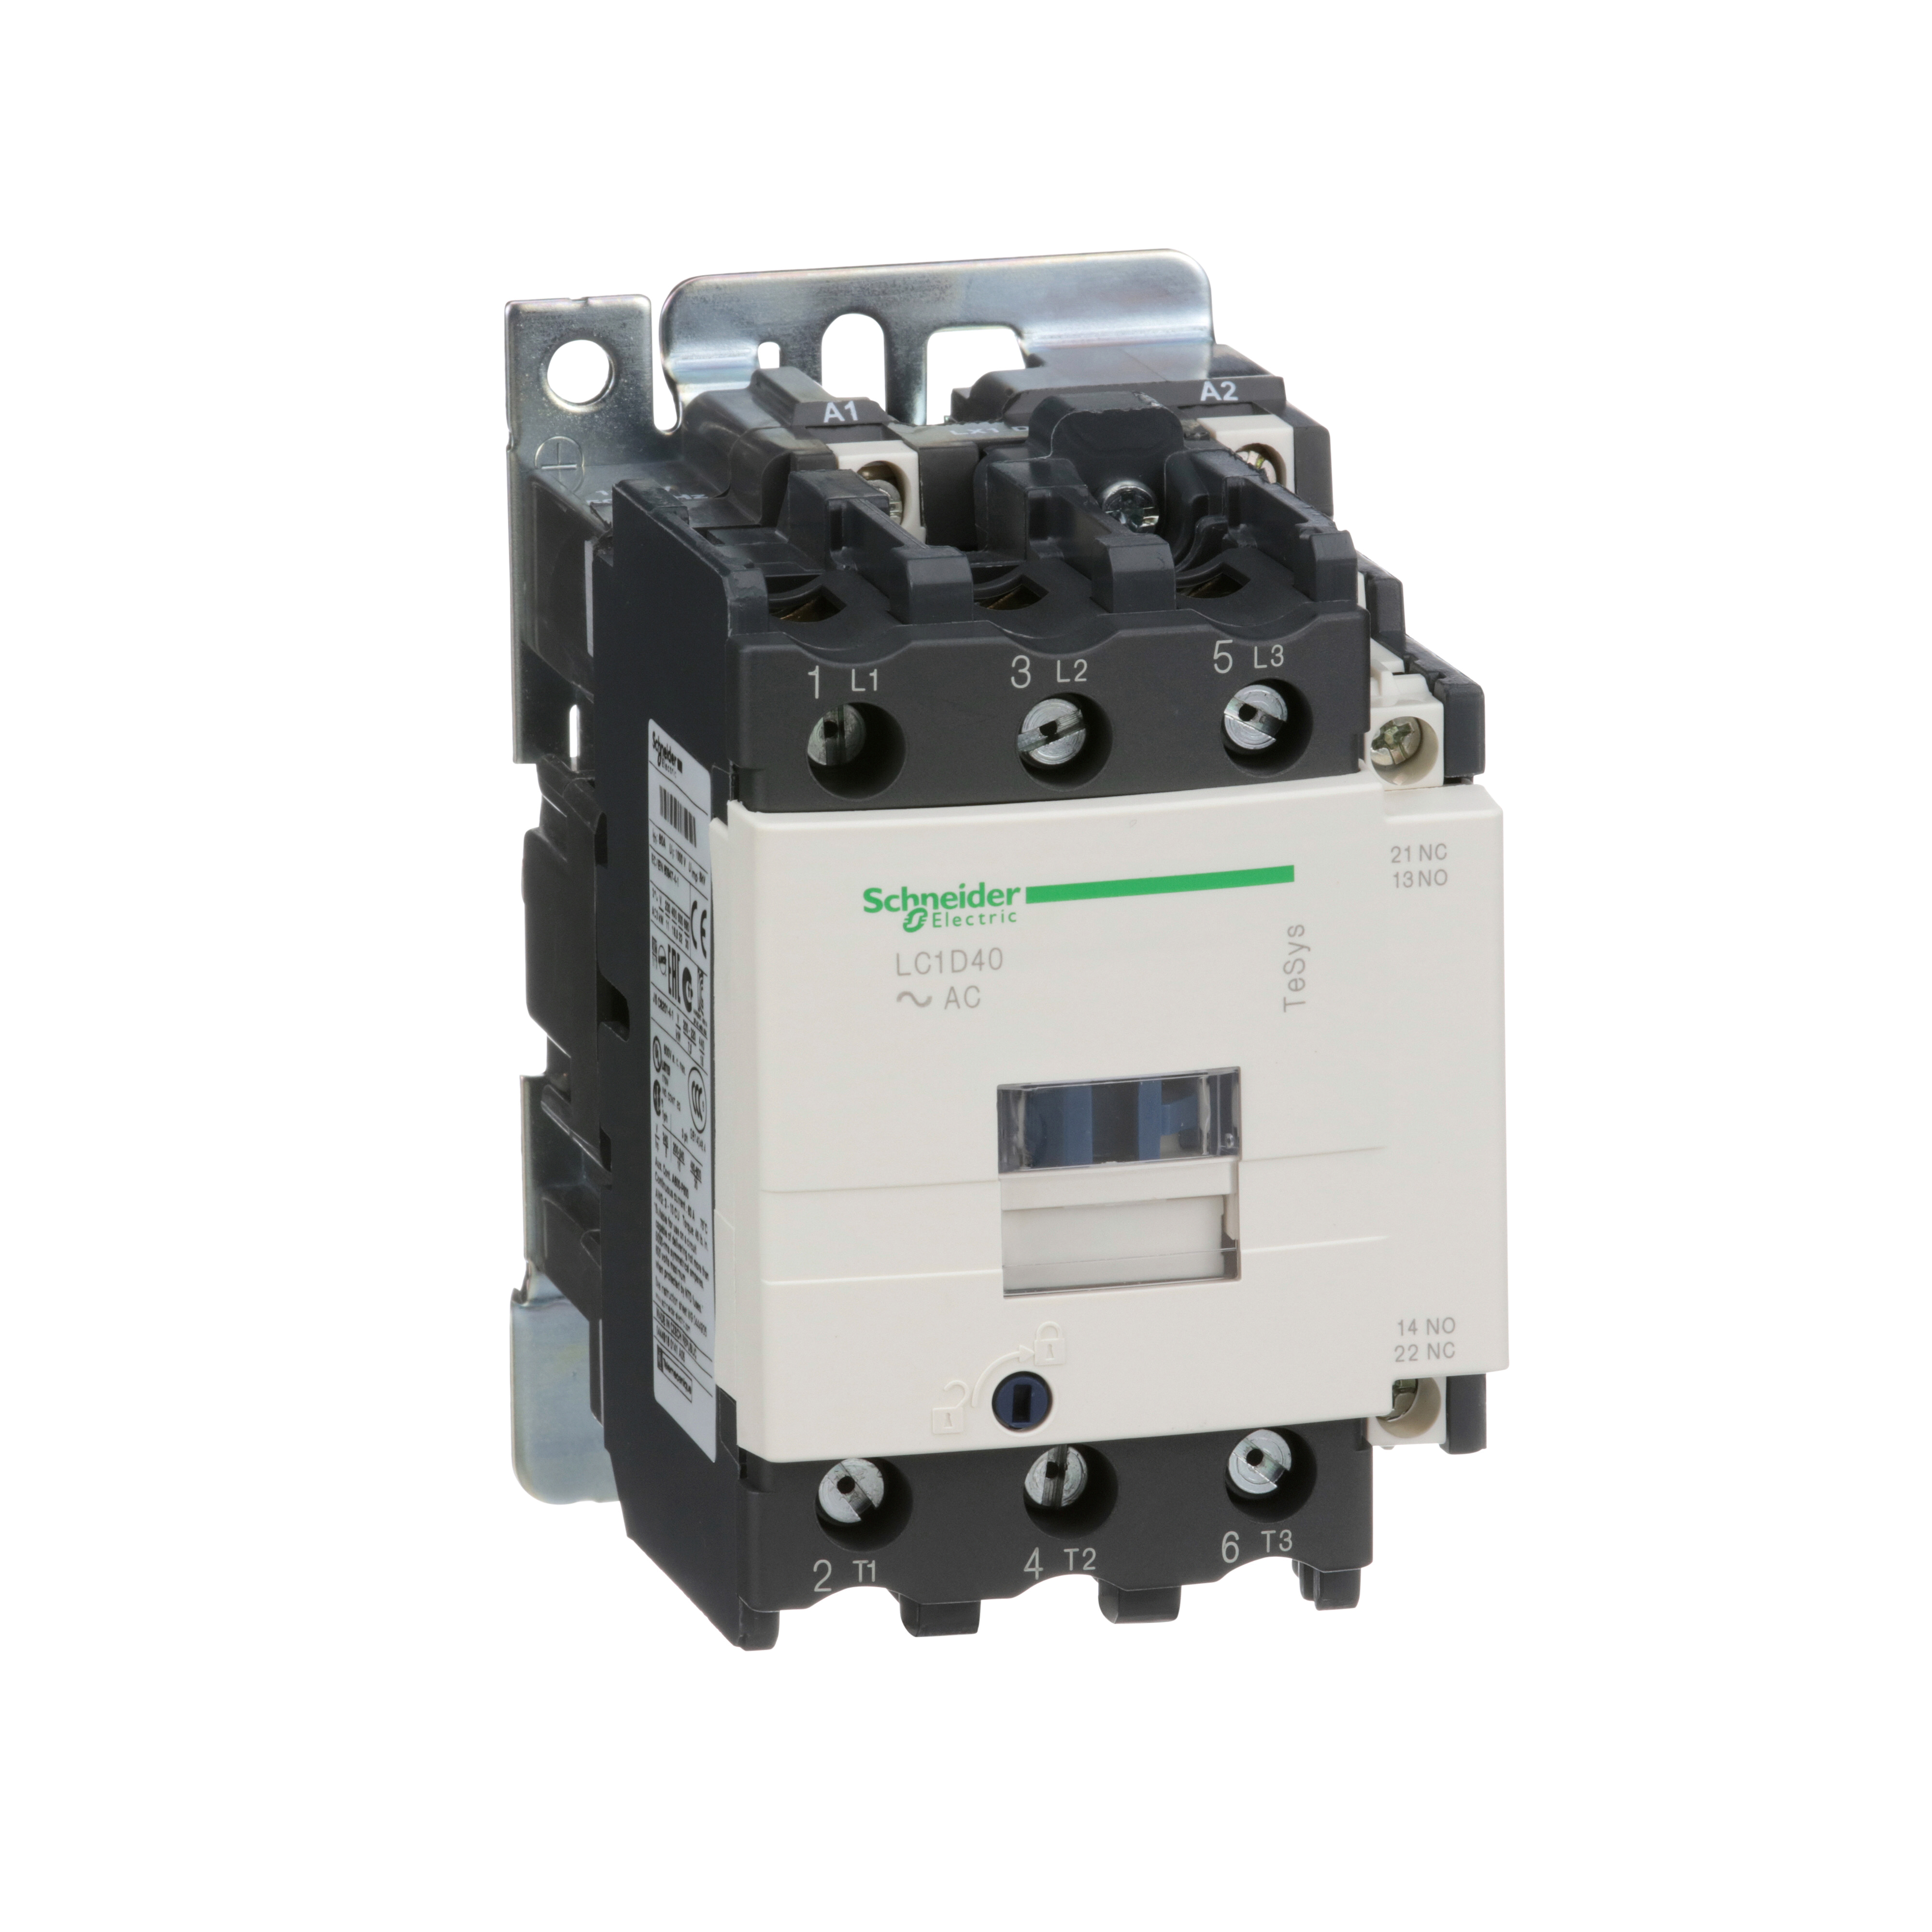 IEC contactor, TeSys D, nonreversing, 40A, 30HP at 480VAC, up to 100kA SCCR, 3 phase, 3 NO, 120VAC 50/60Hz coil, open